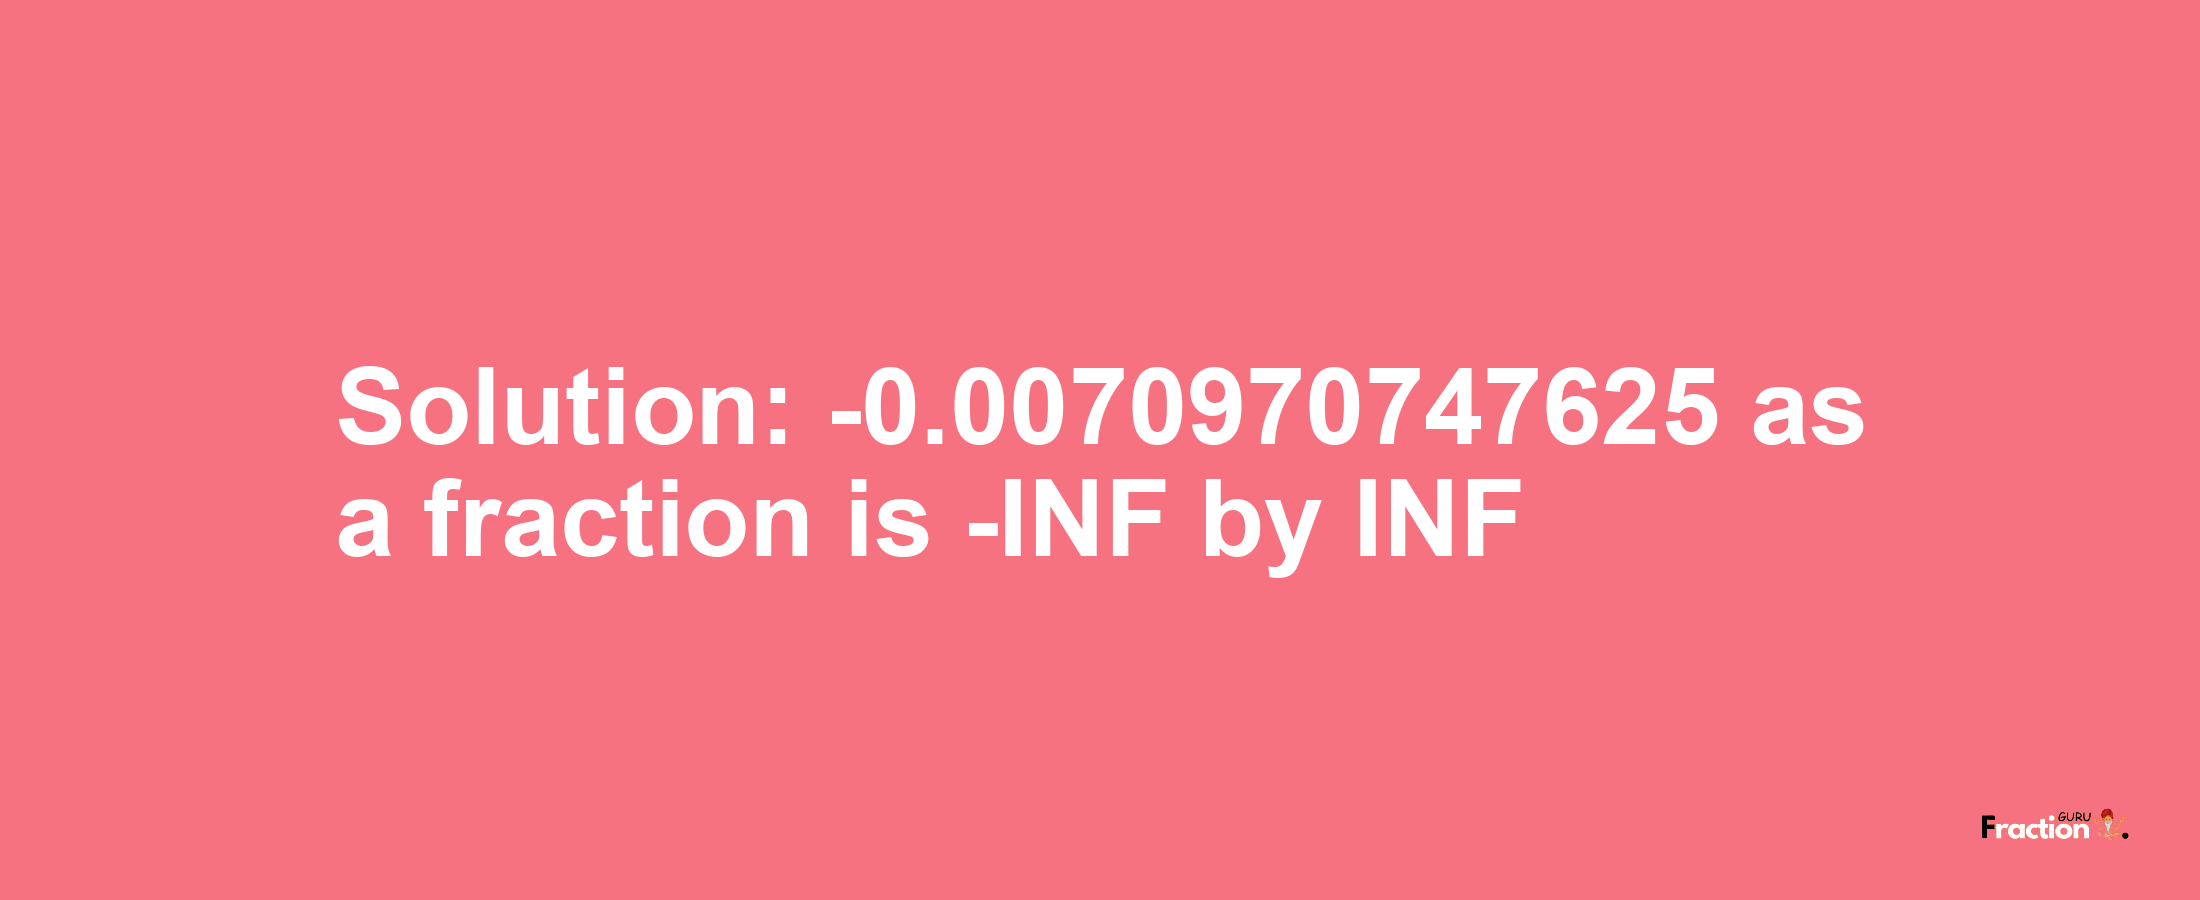 Solution:-0.0070970747625 as a fraction is -INF/INF